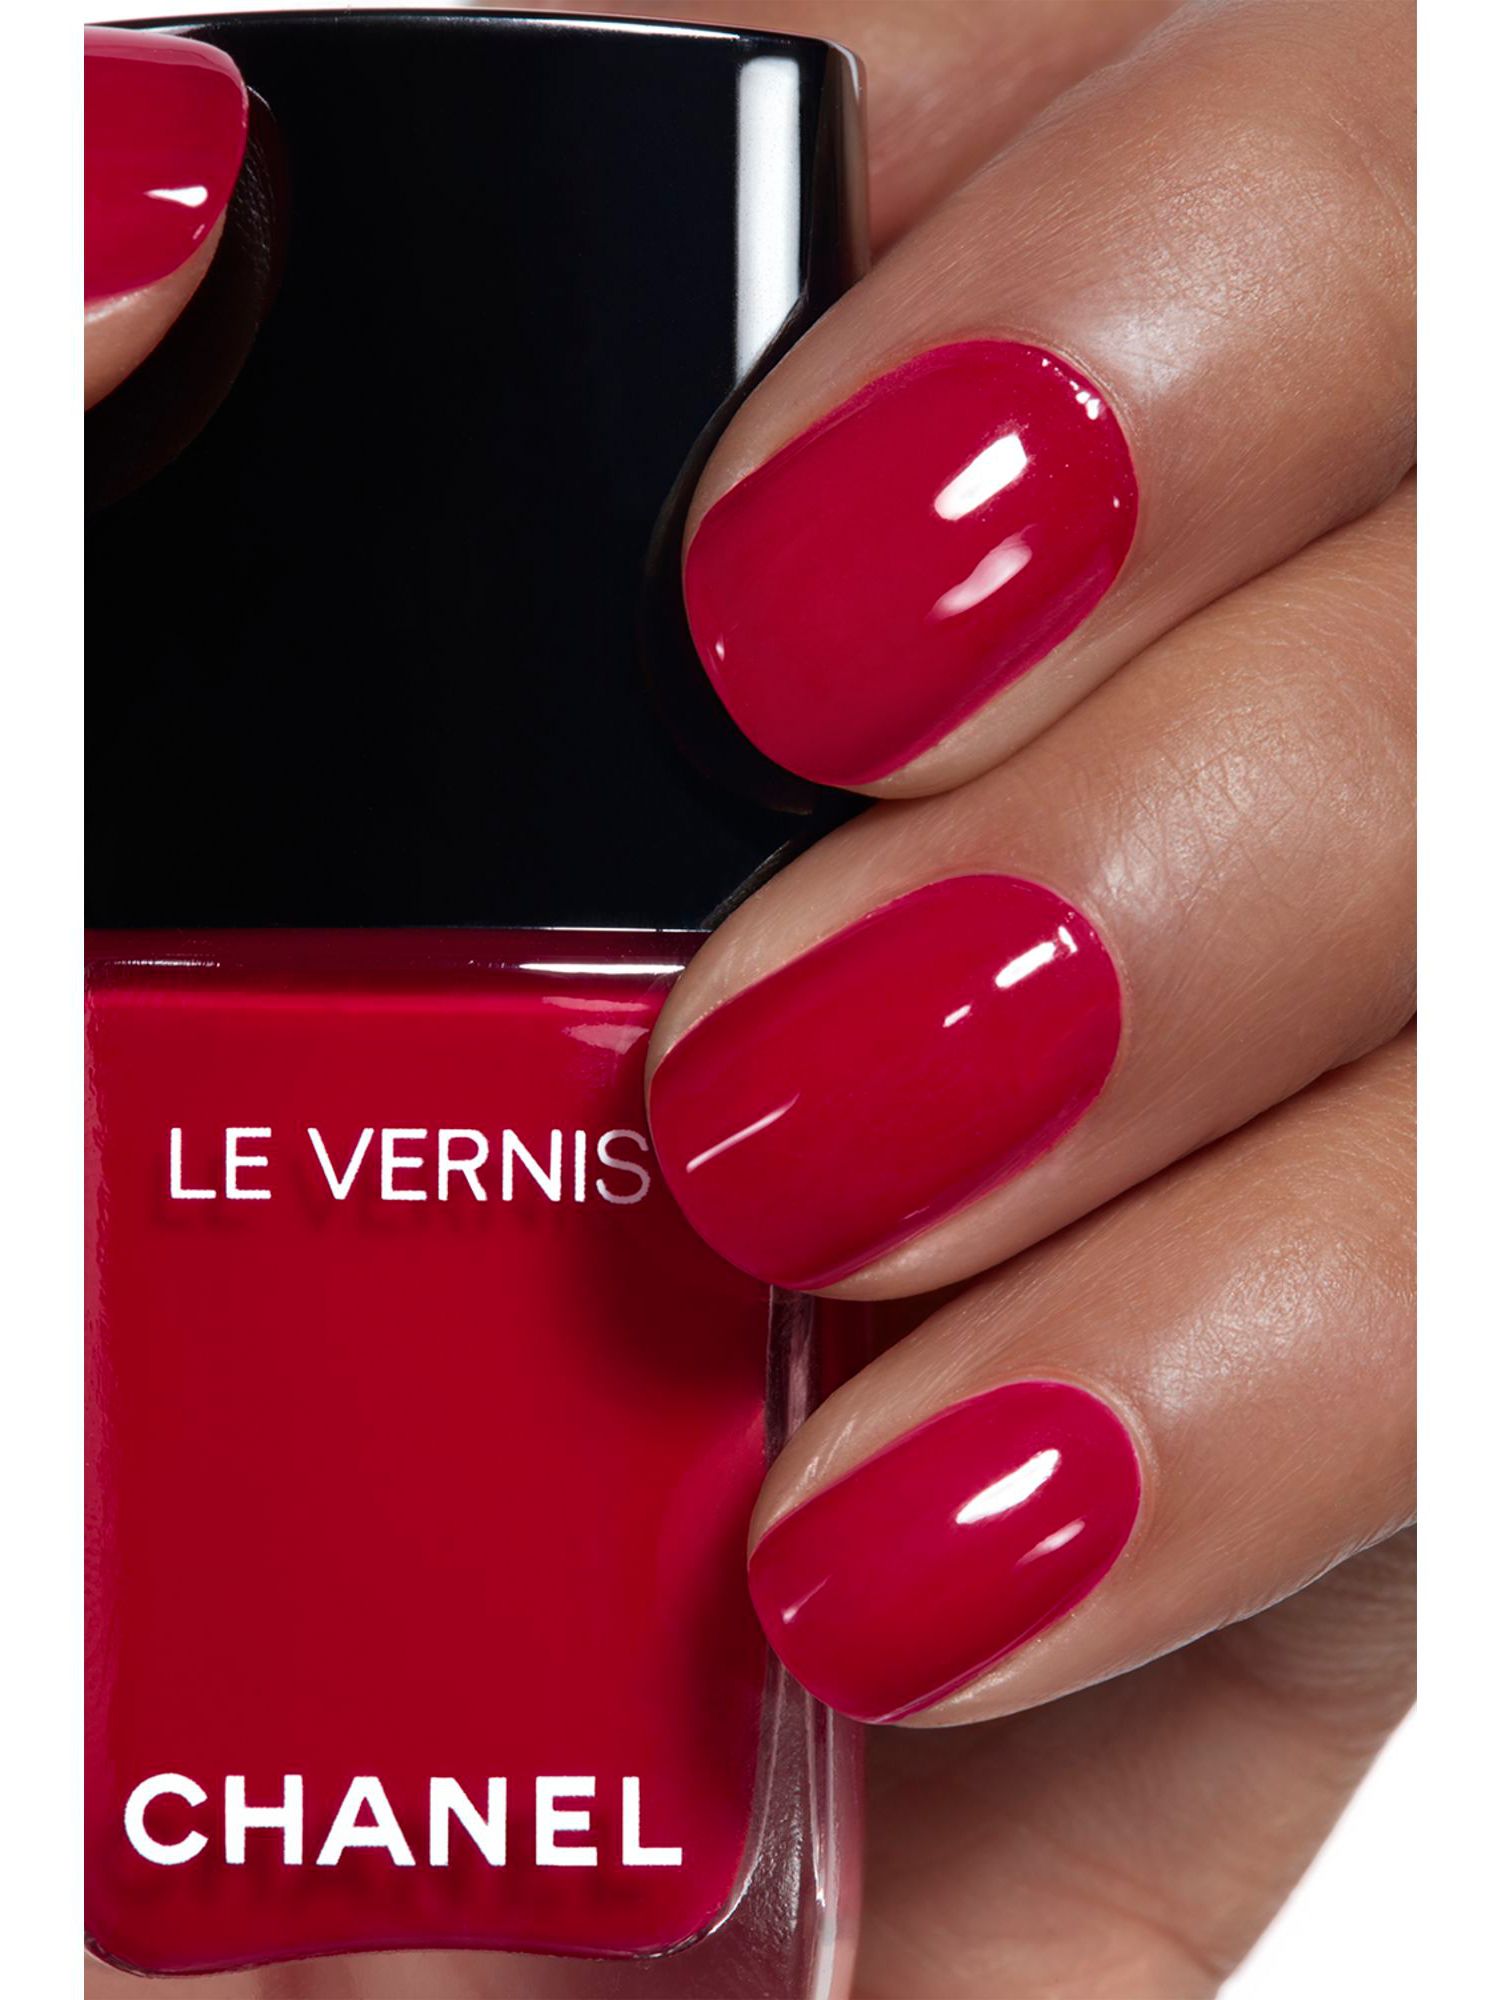 Pirate CHANEL Colour, Nail at 151 Vernis Partners Lewis & Le John